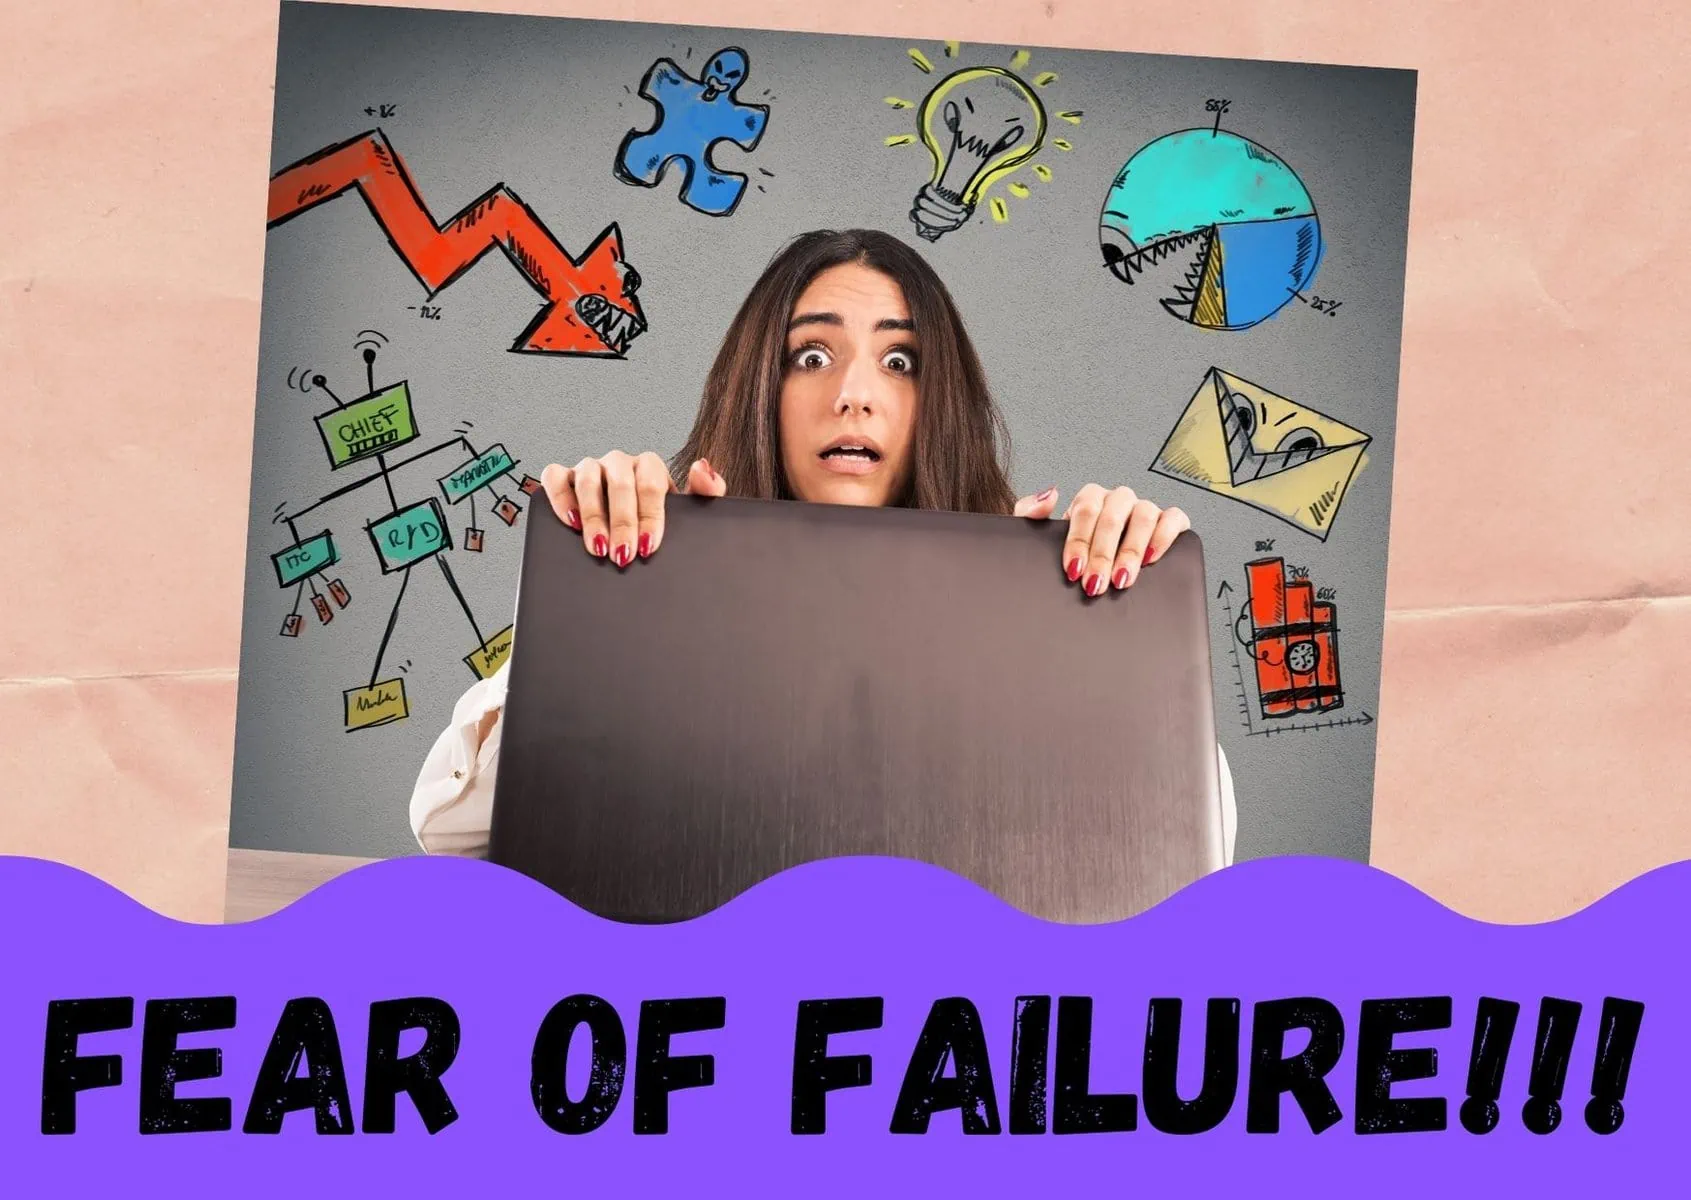 Reasons For Exam Anxiety - Fear of Failure